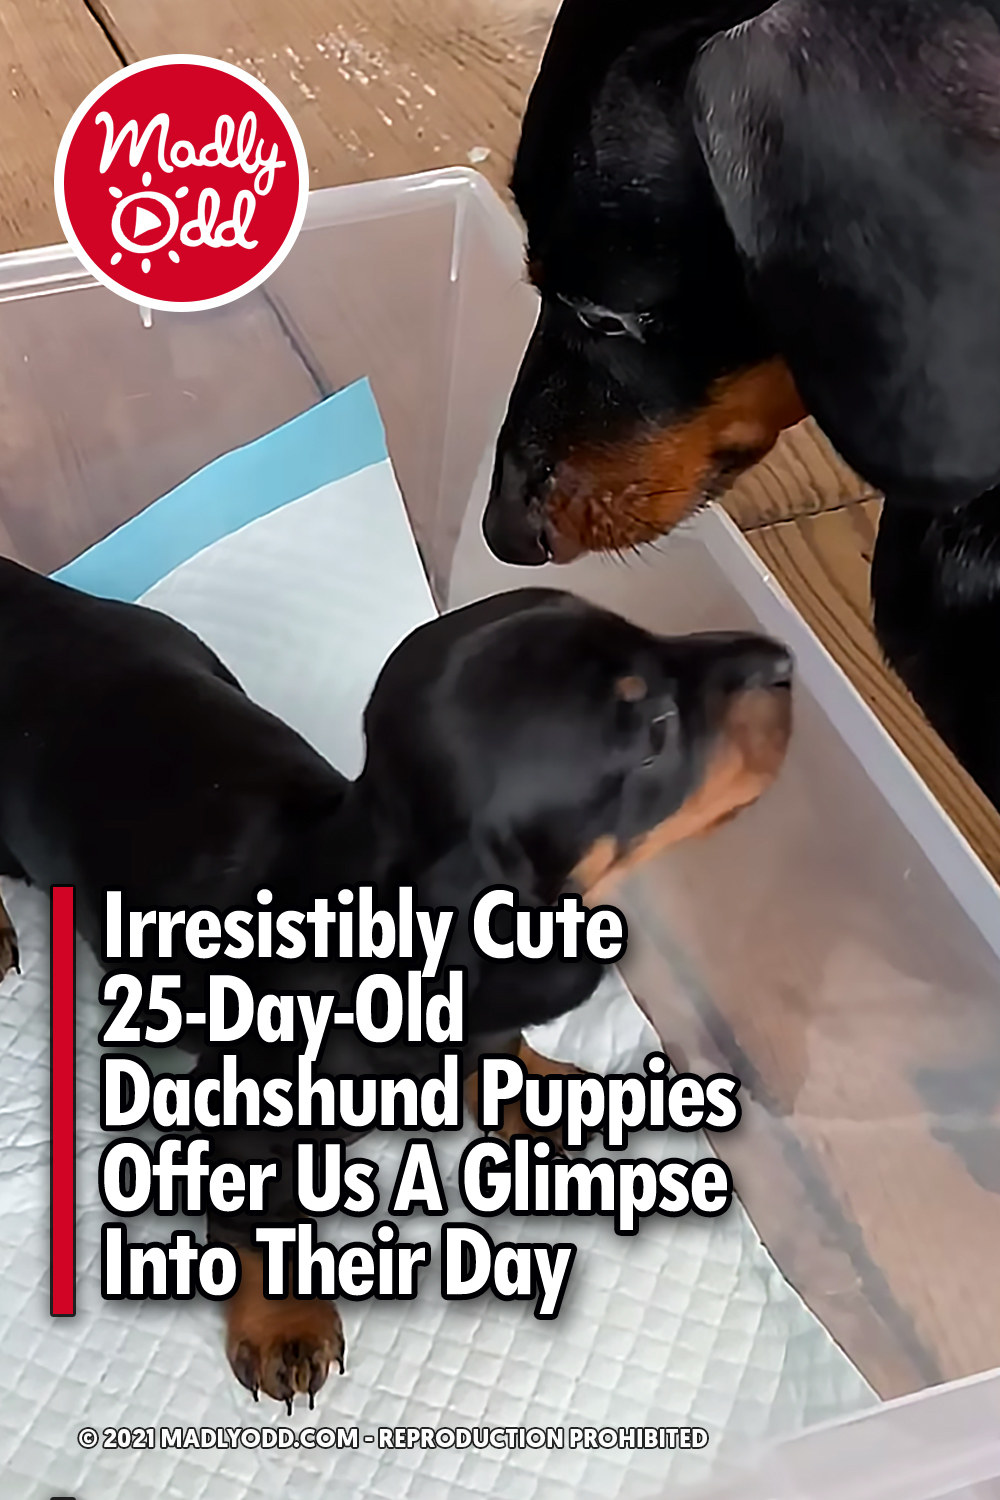 Irresistibly Cute 25-Day-Old Dachshund Puppies Offer Us A Glimpse Into Their Day